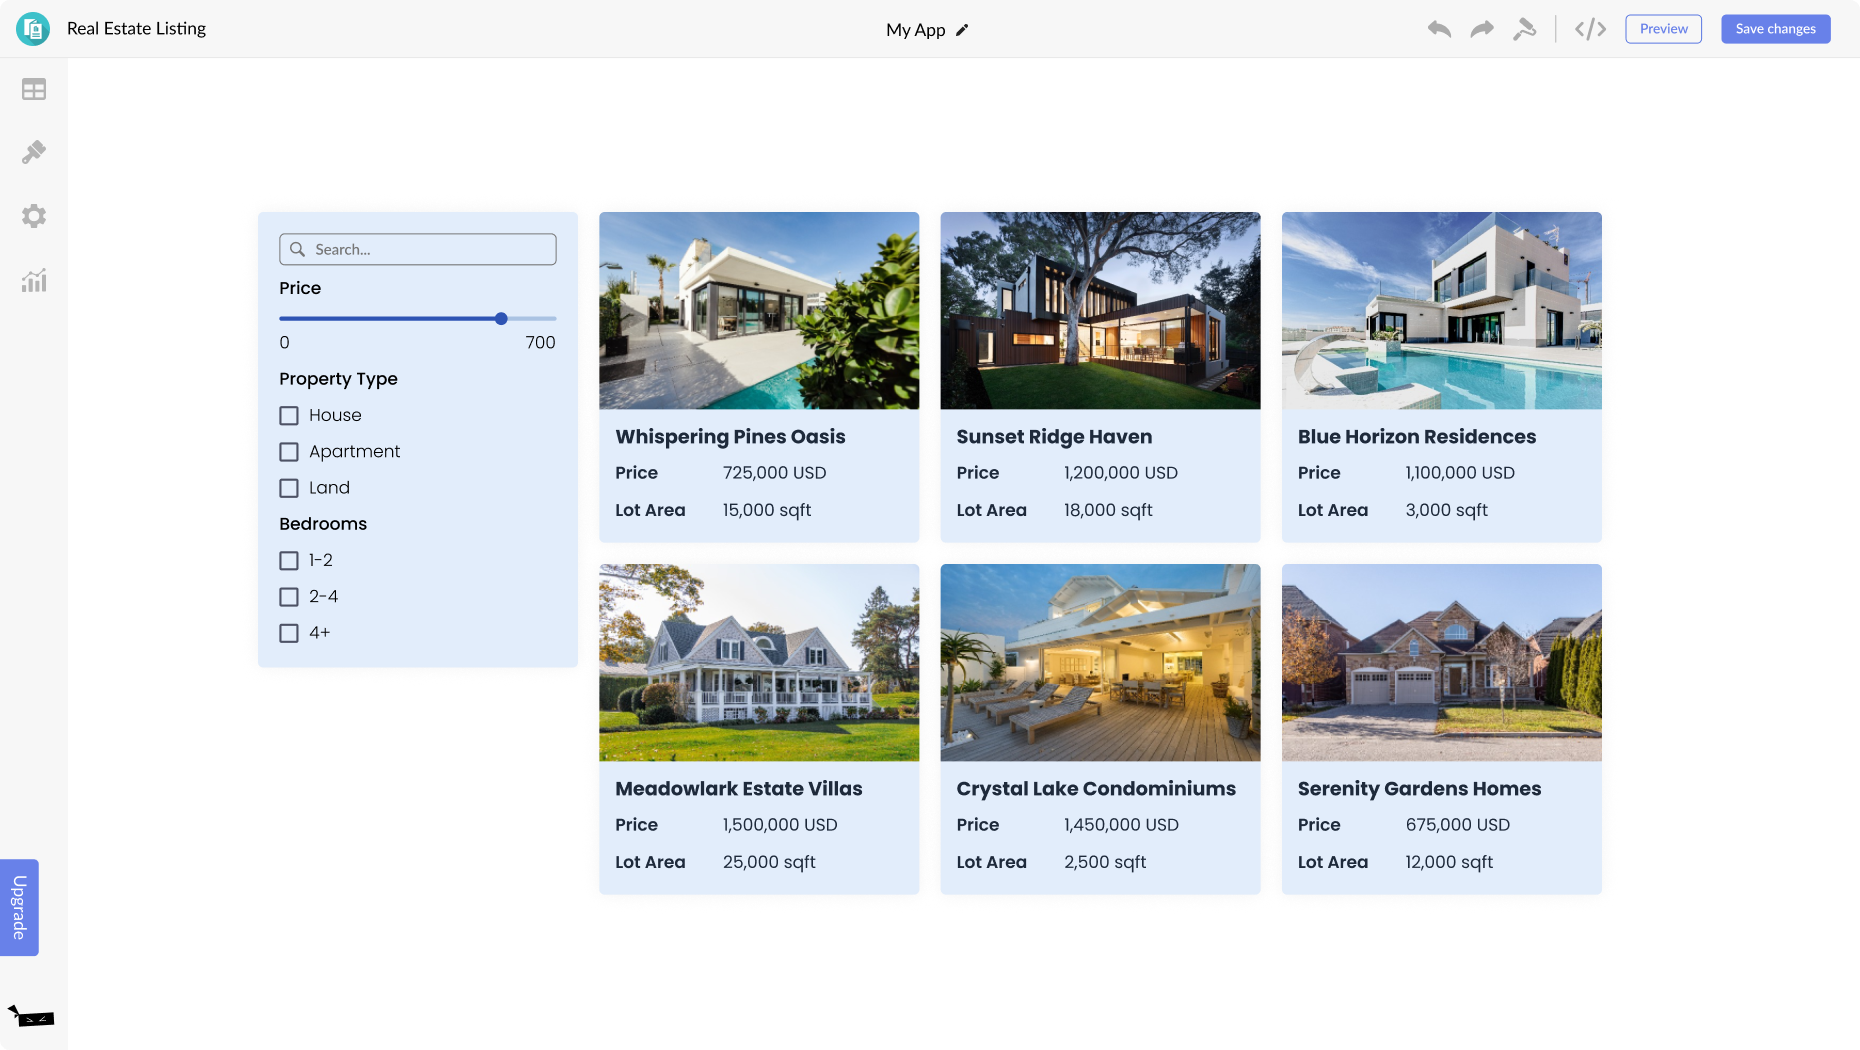 Real Estate Listings for Pivot Page Builder